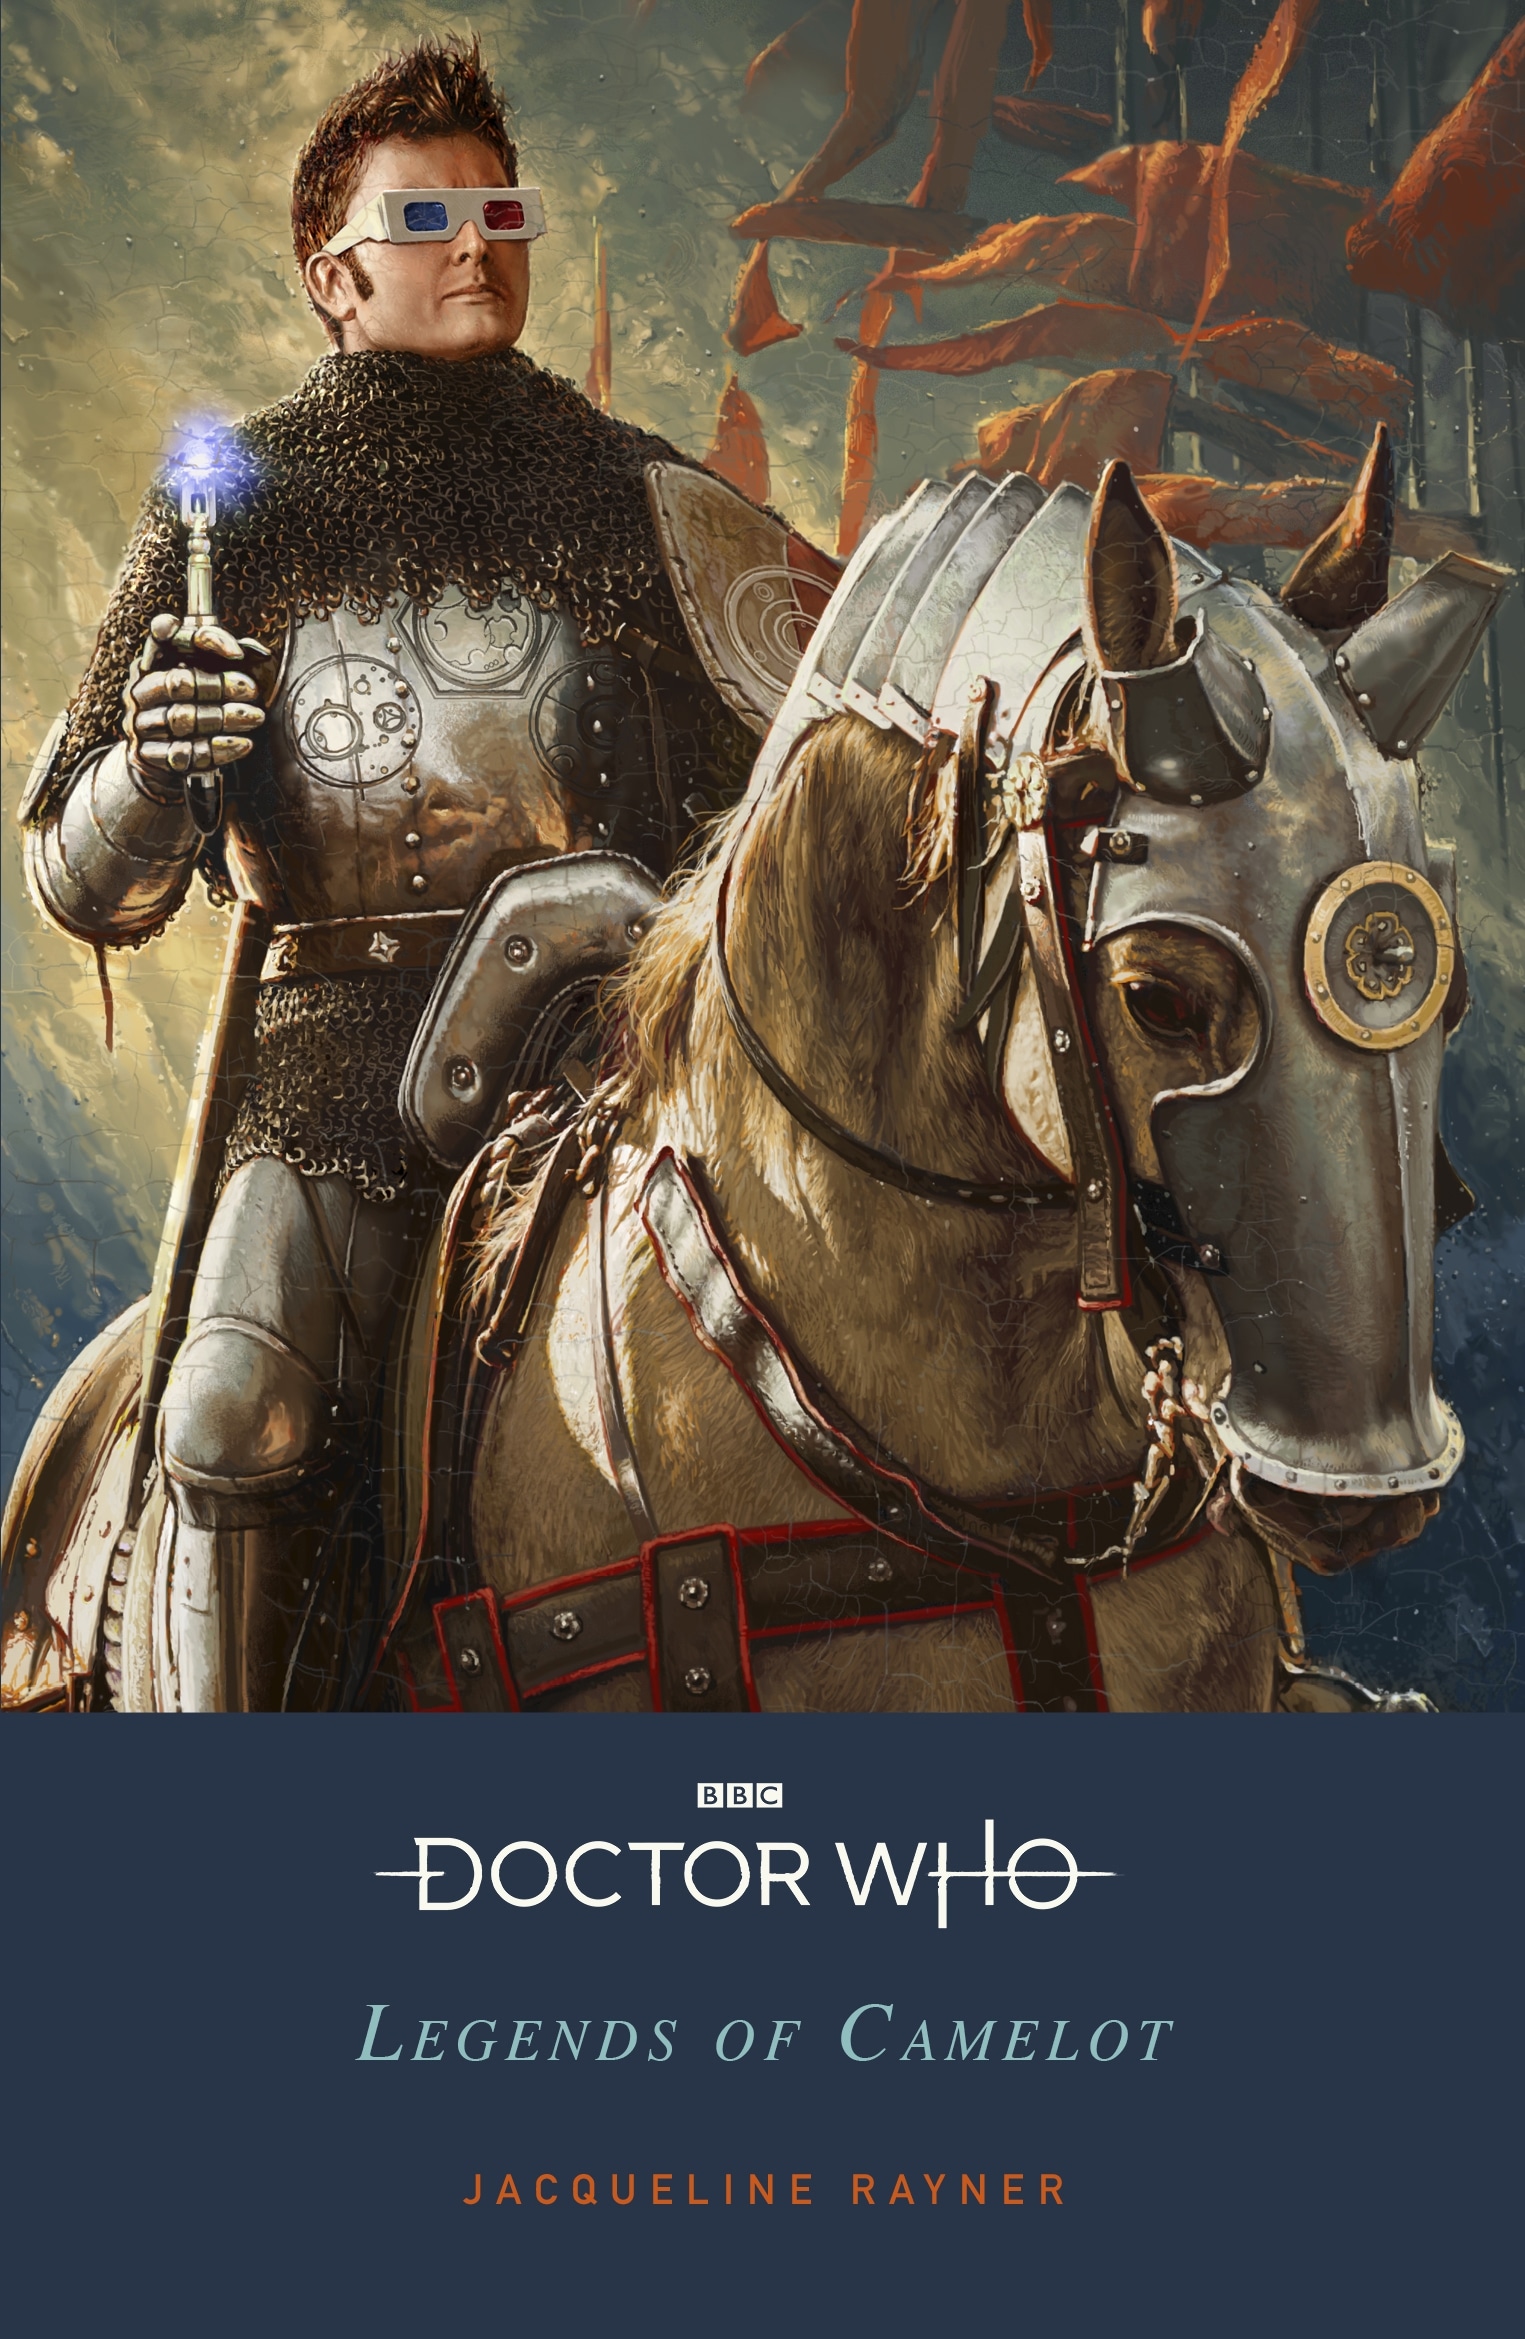 Book “Doctor Who: Legends of Camelot” by Jacqueline Rayner — June 10, 2021